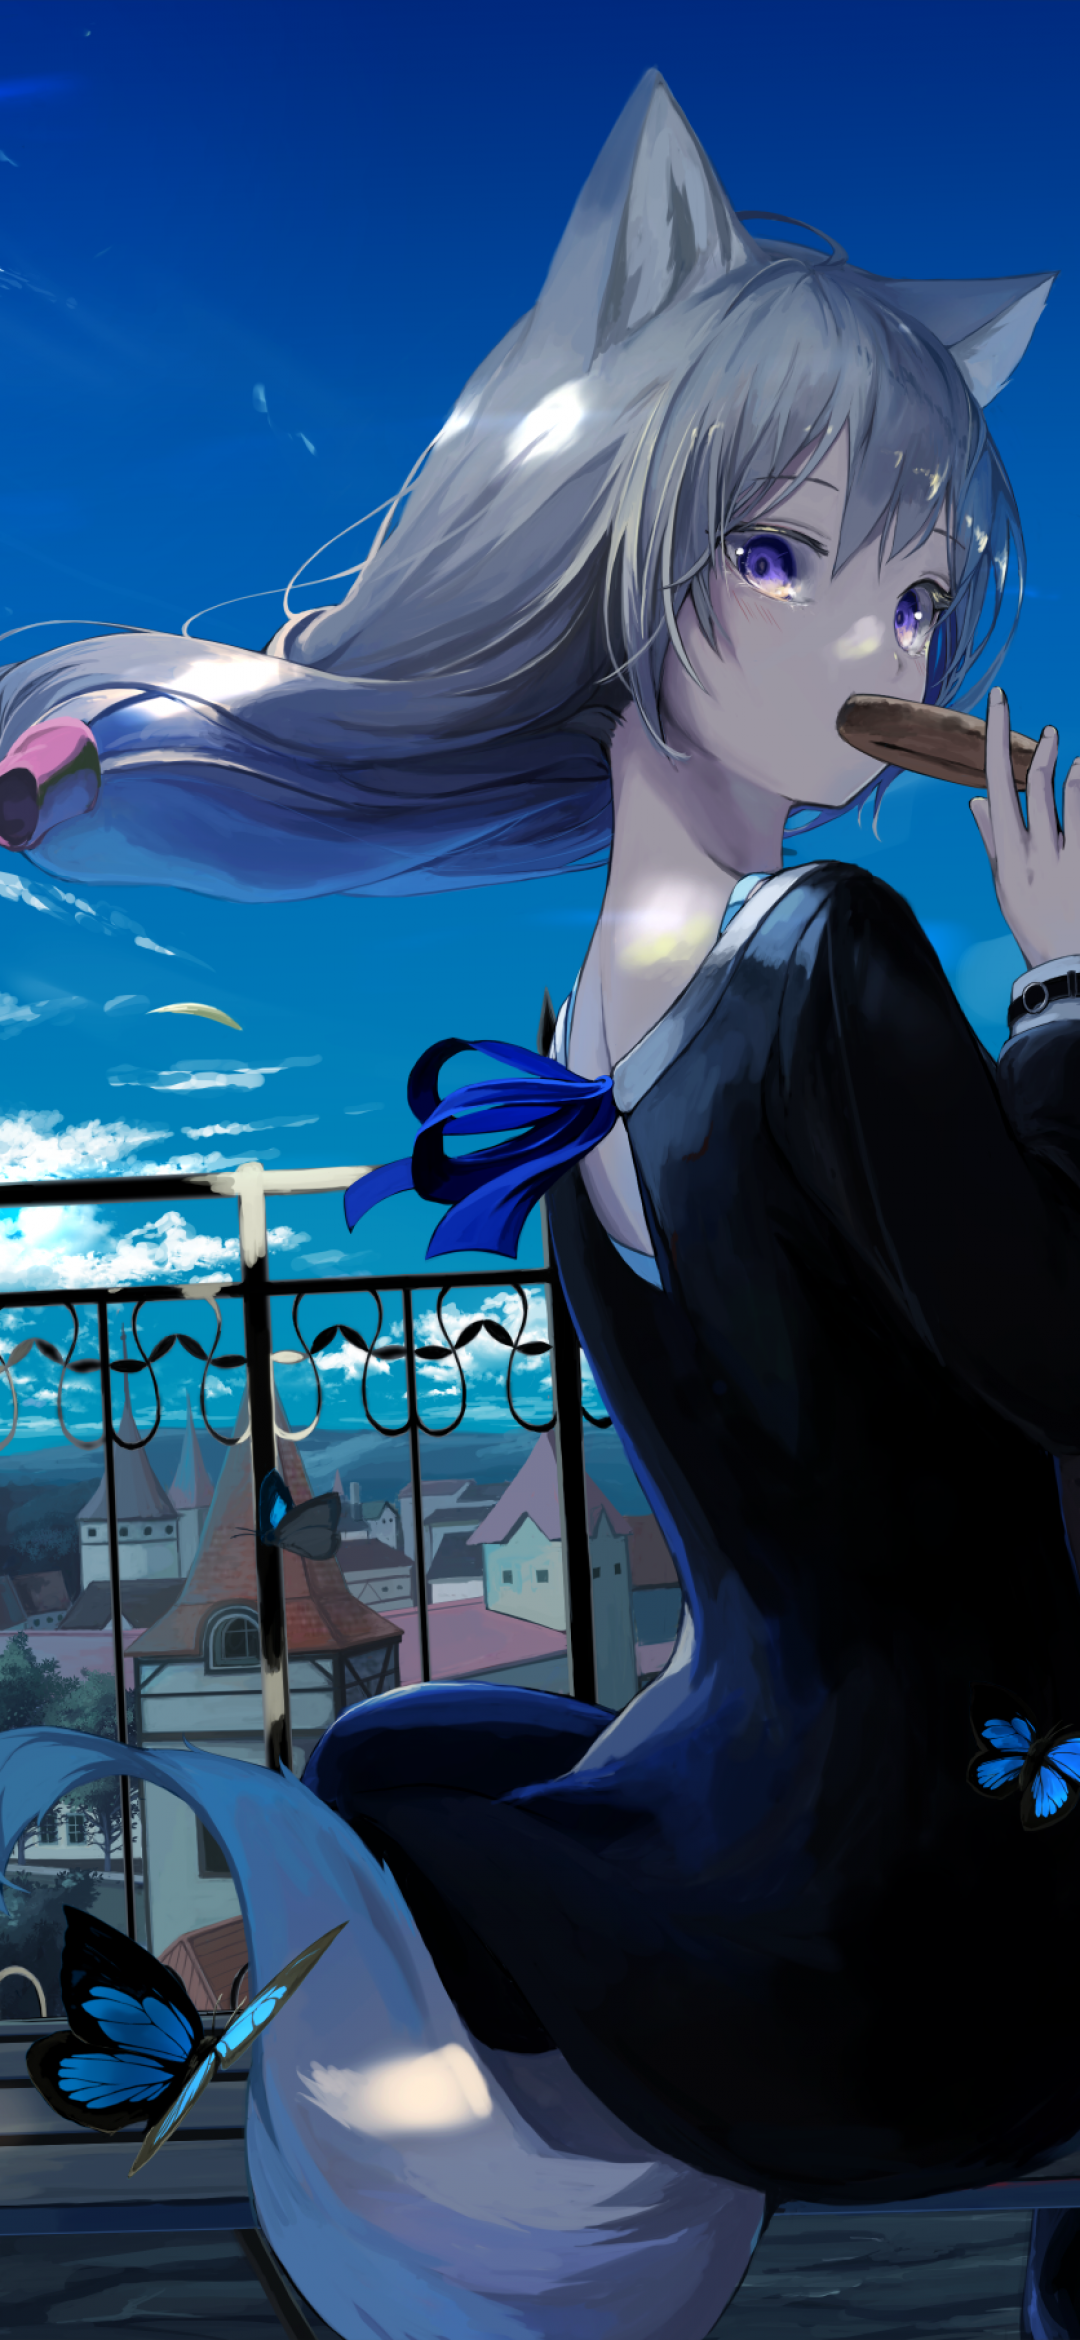 Download 1080x2340 Anime Cat Girl, Wind, City, Buildings, Fence